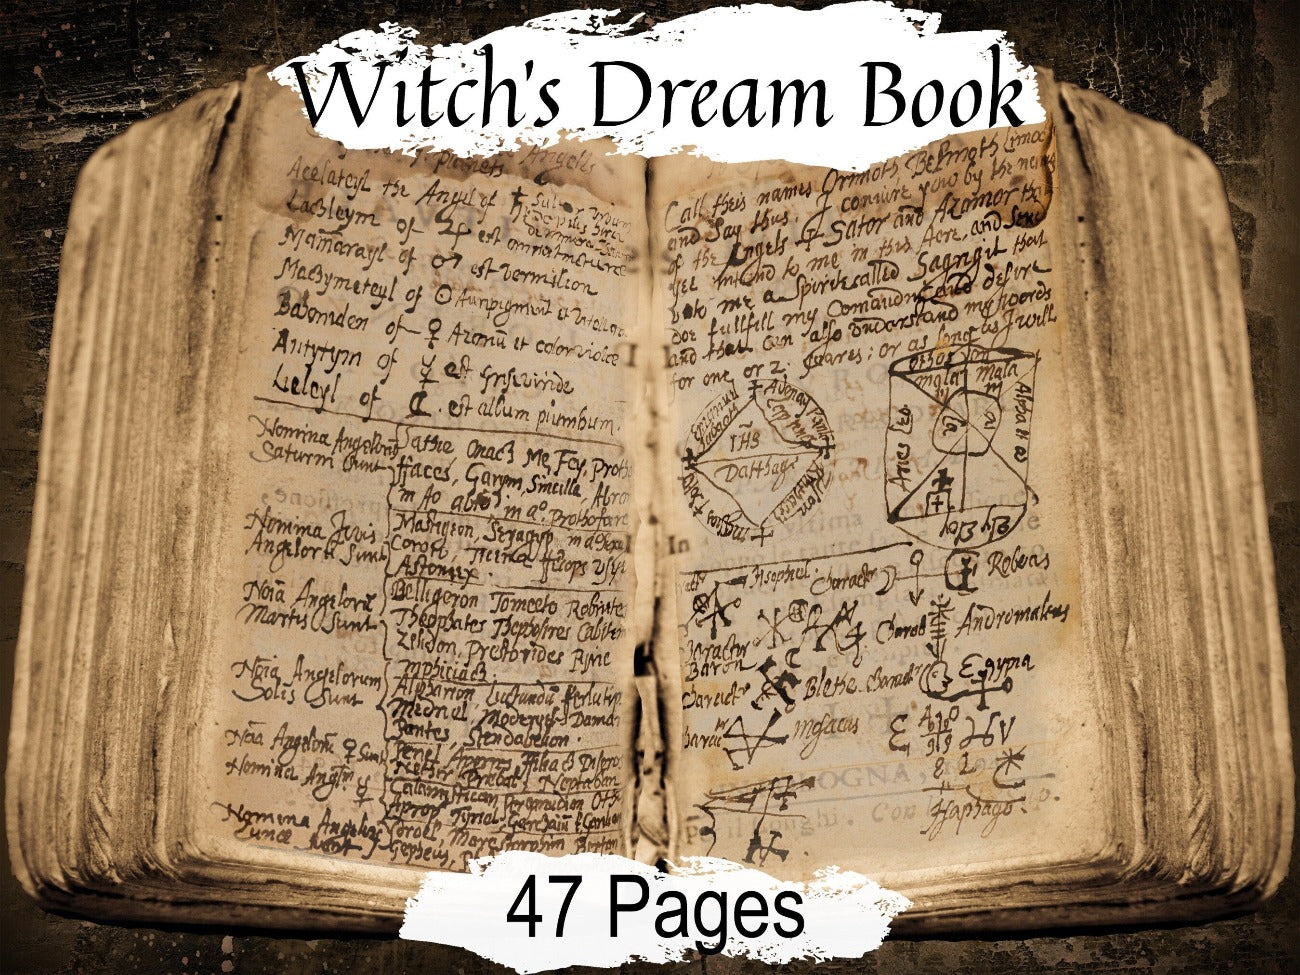 WITCHS DREAM BOOK, From 300 year old Grimore, Wicca Witchcraft, Instant Download, Lucid Dreams, Dream Guide Interpretations, 47 Pages - Morgana Magick Spell